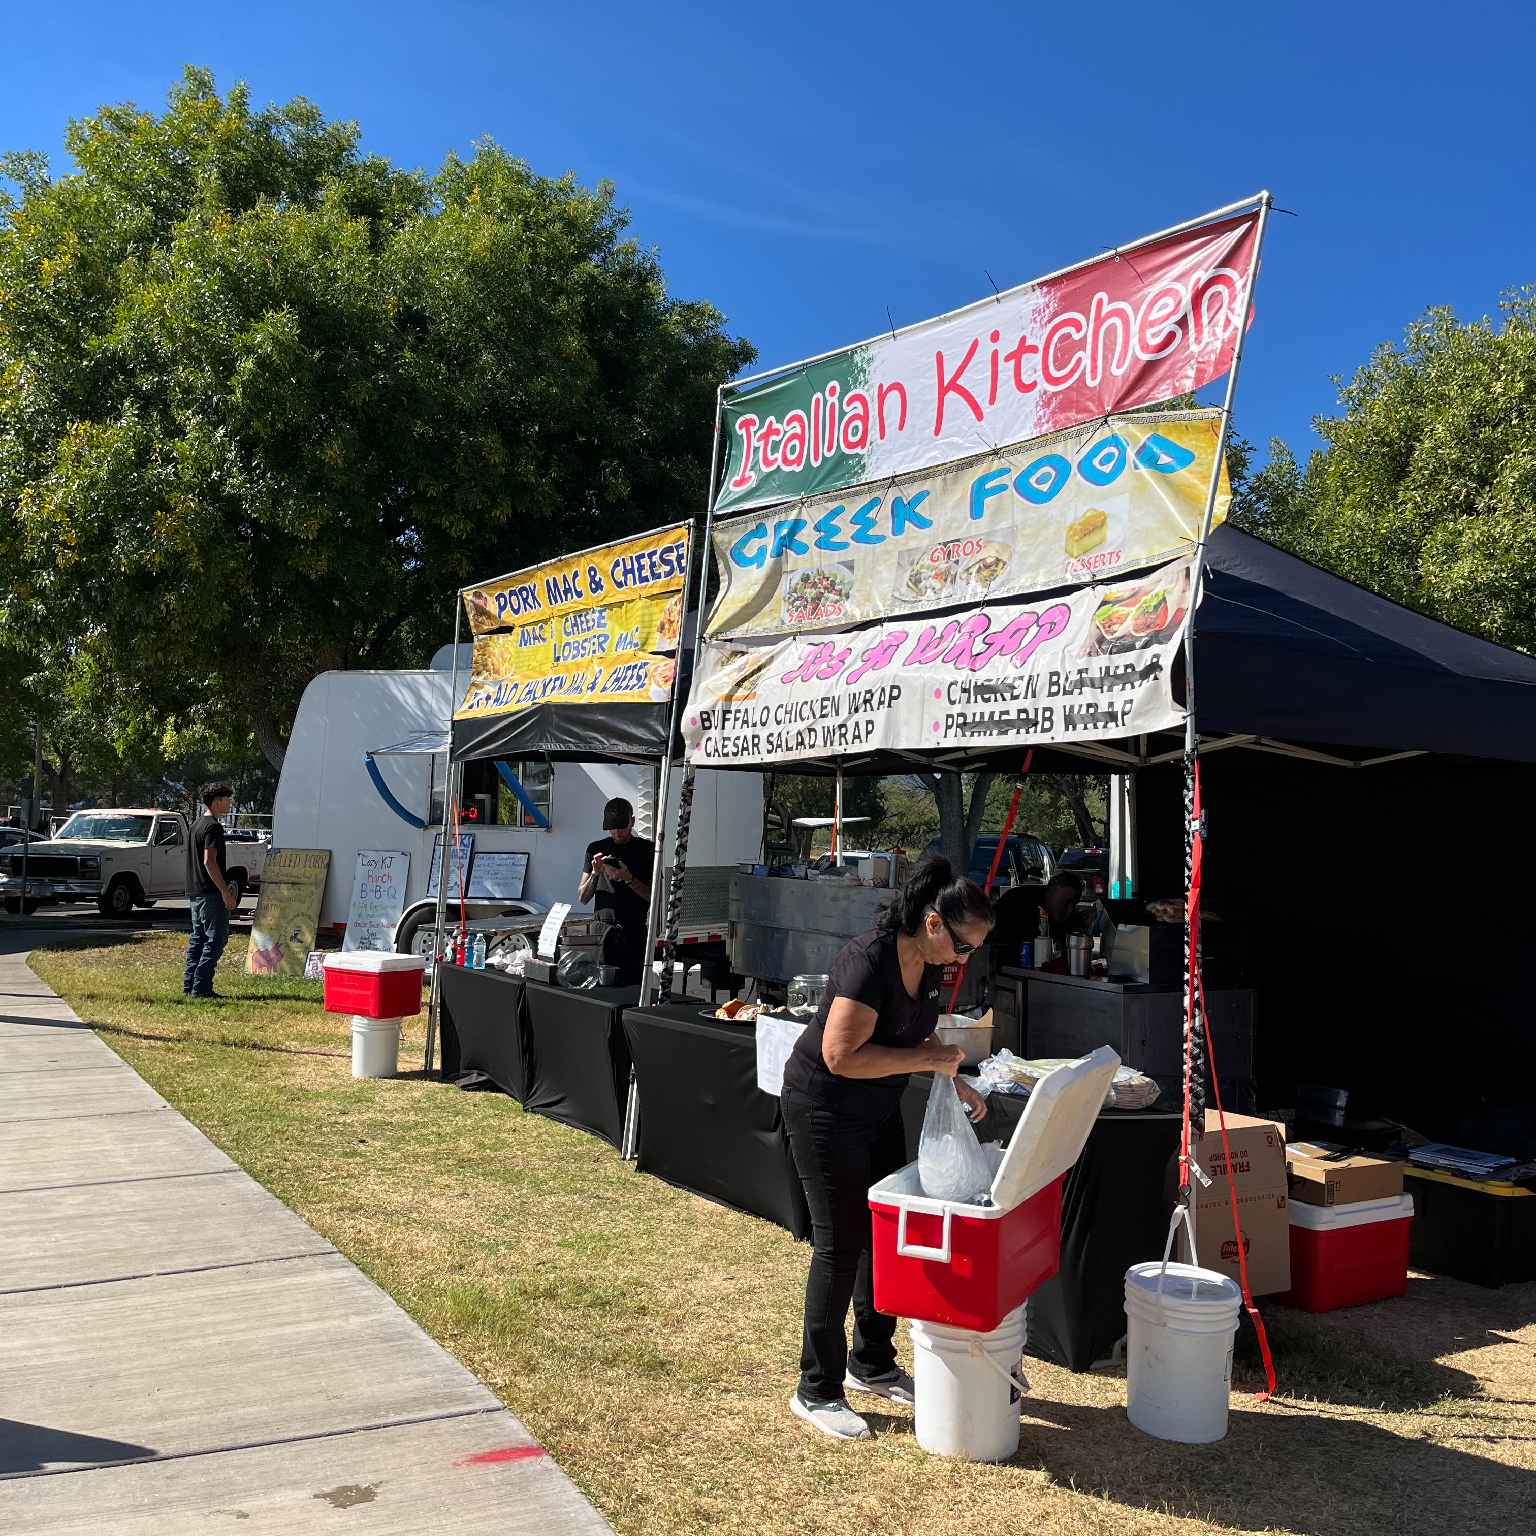 Some of the tasty food vendors at Art in the Park